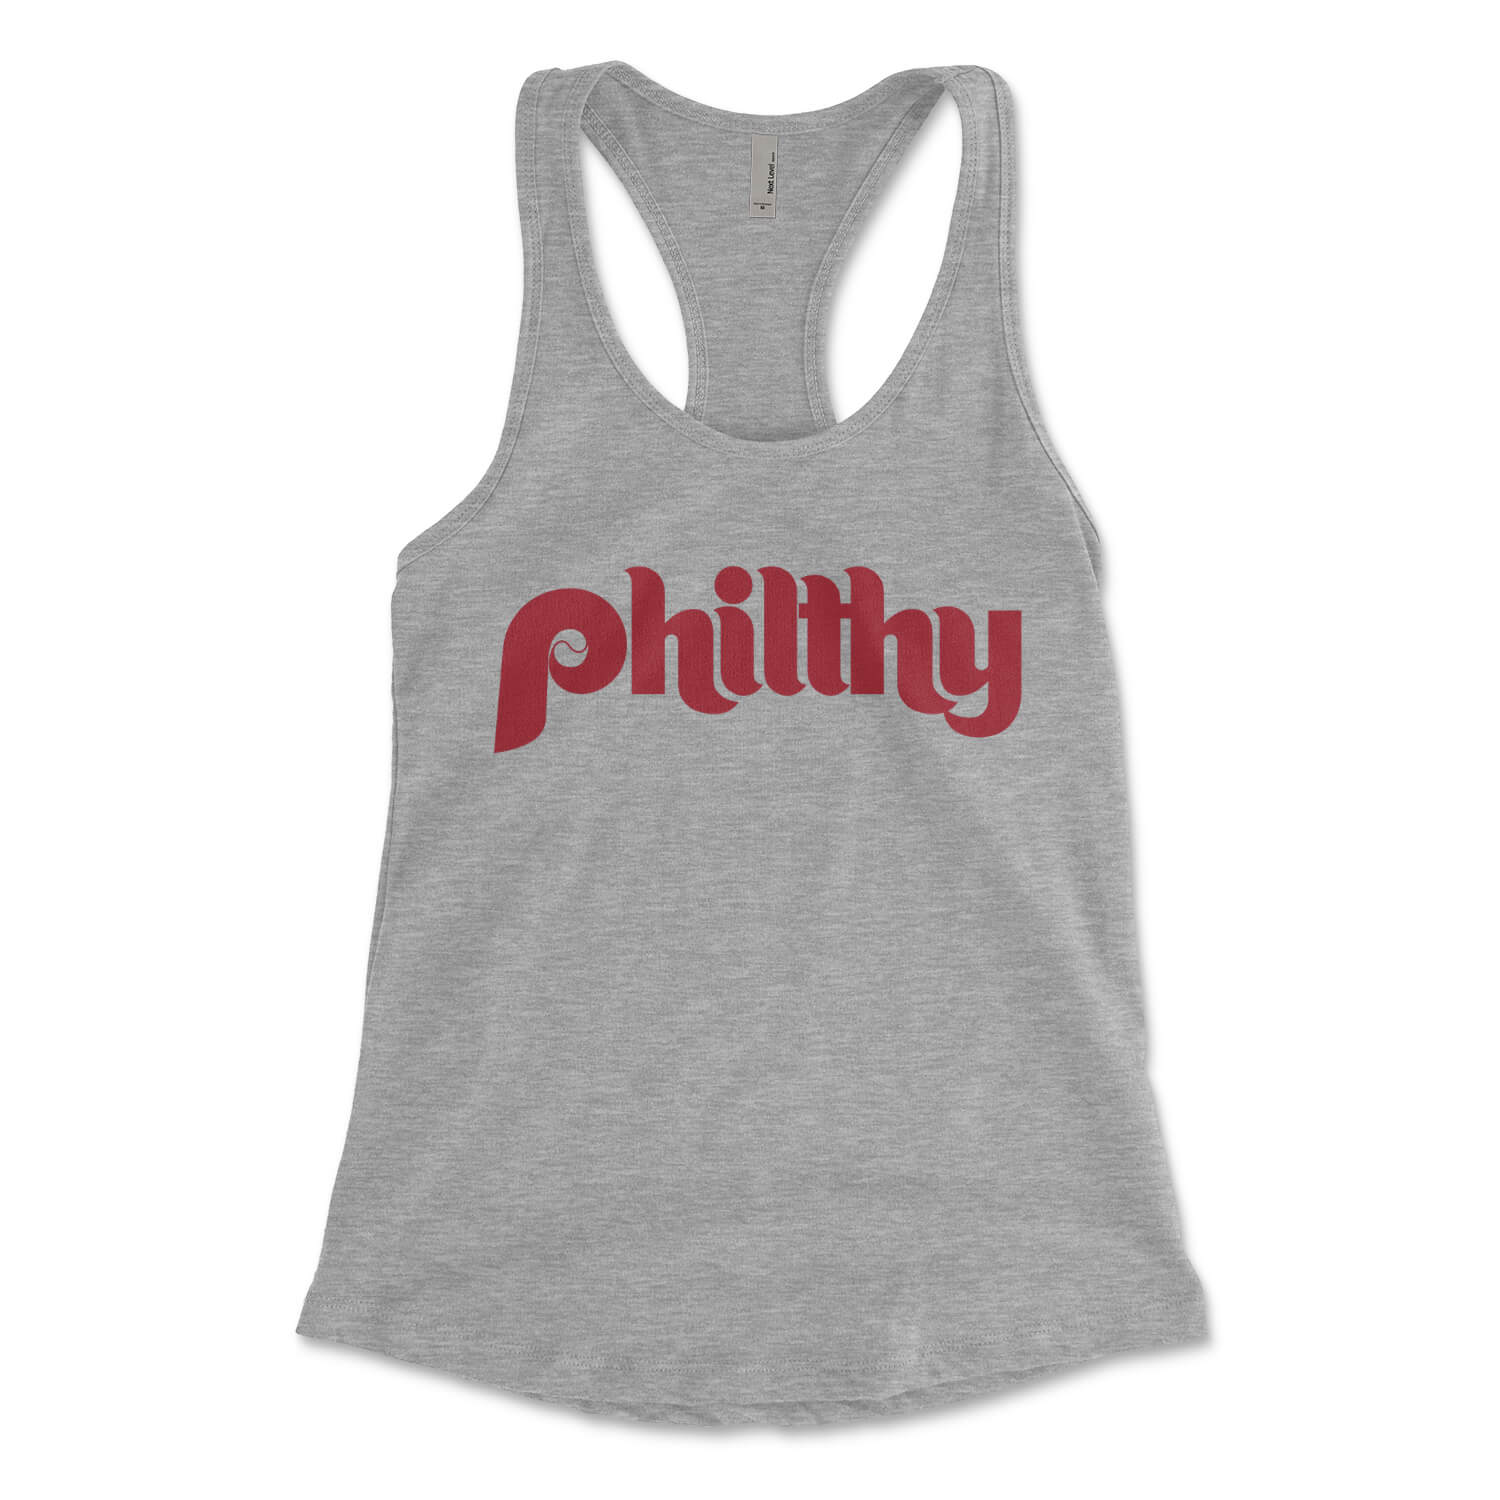 Philadelphia Phillies Philthy heather grey womens racerback tank top from Phillygoat 